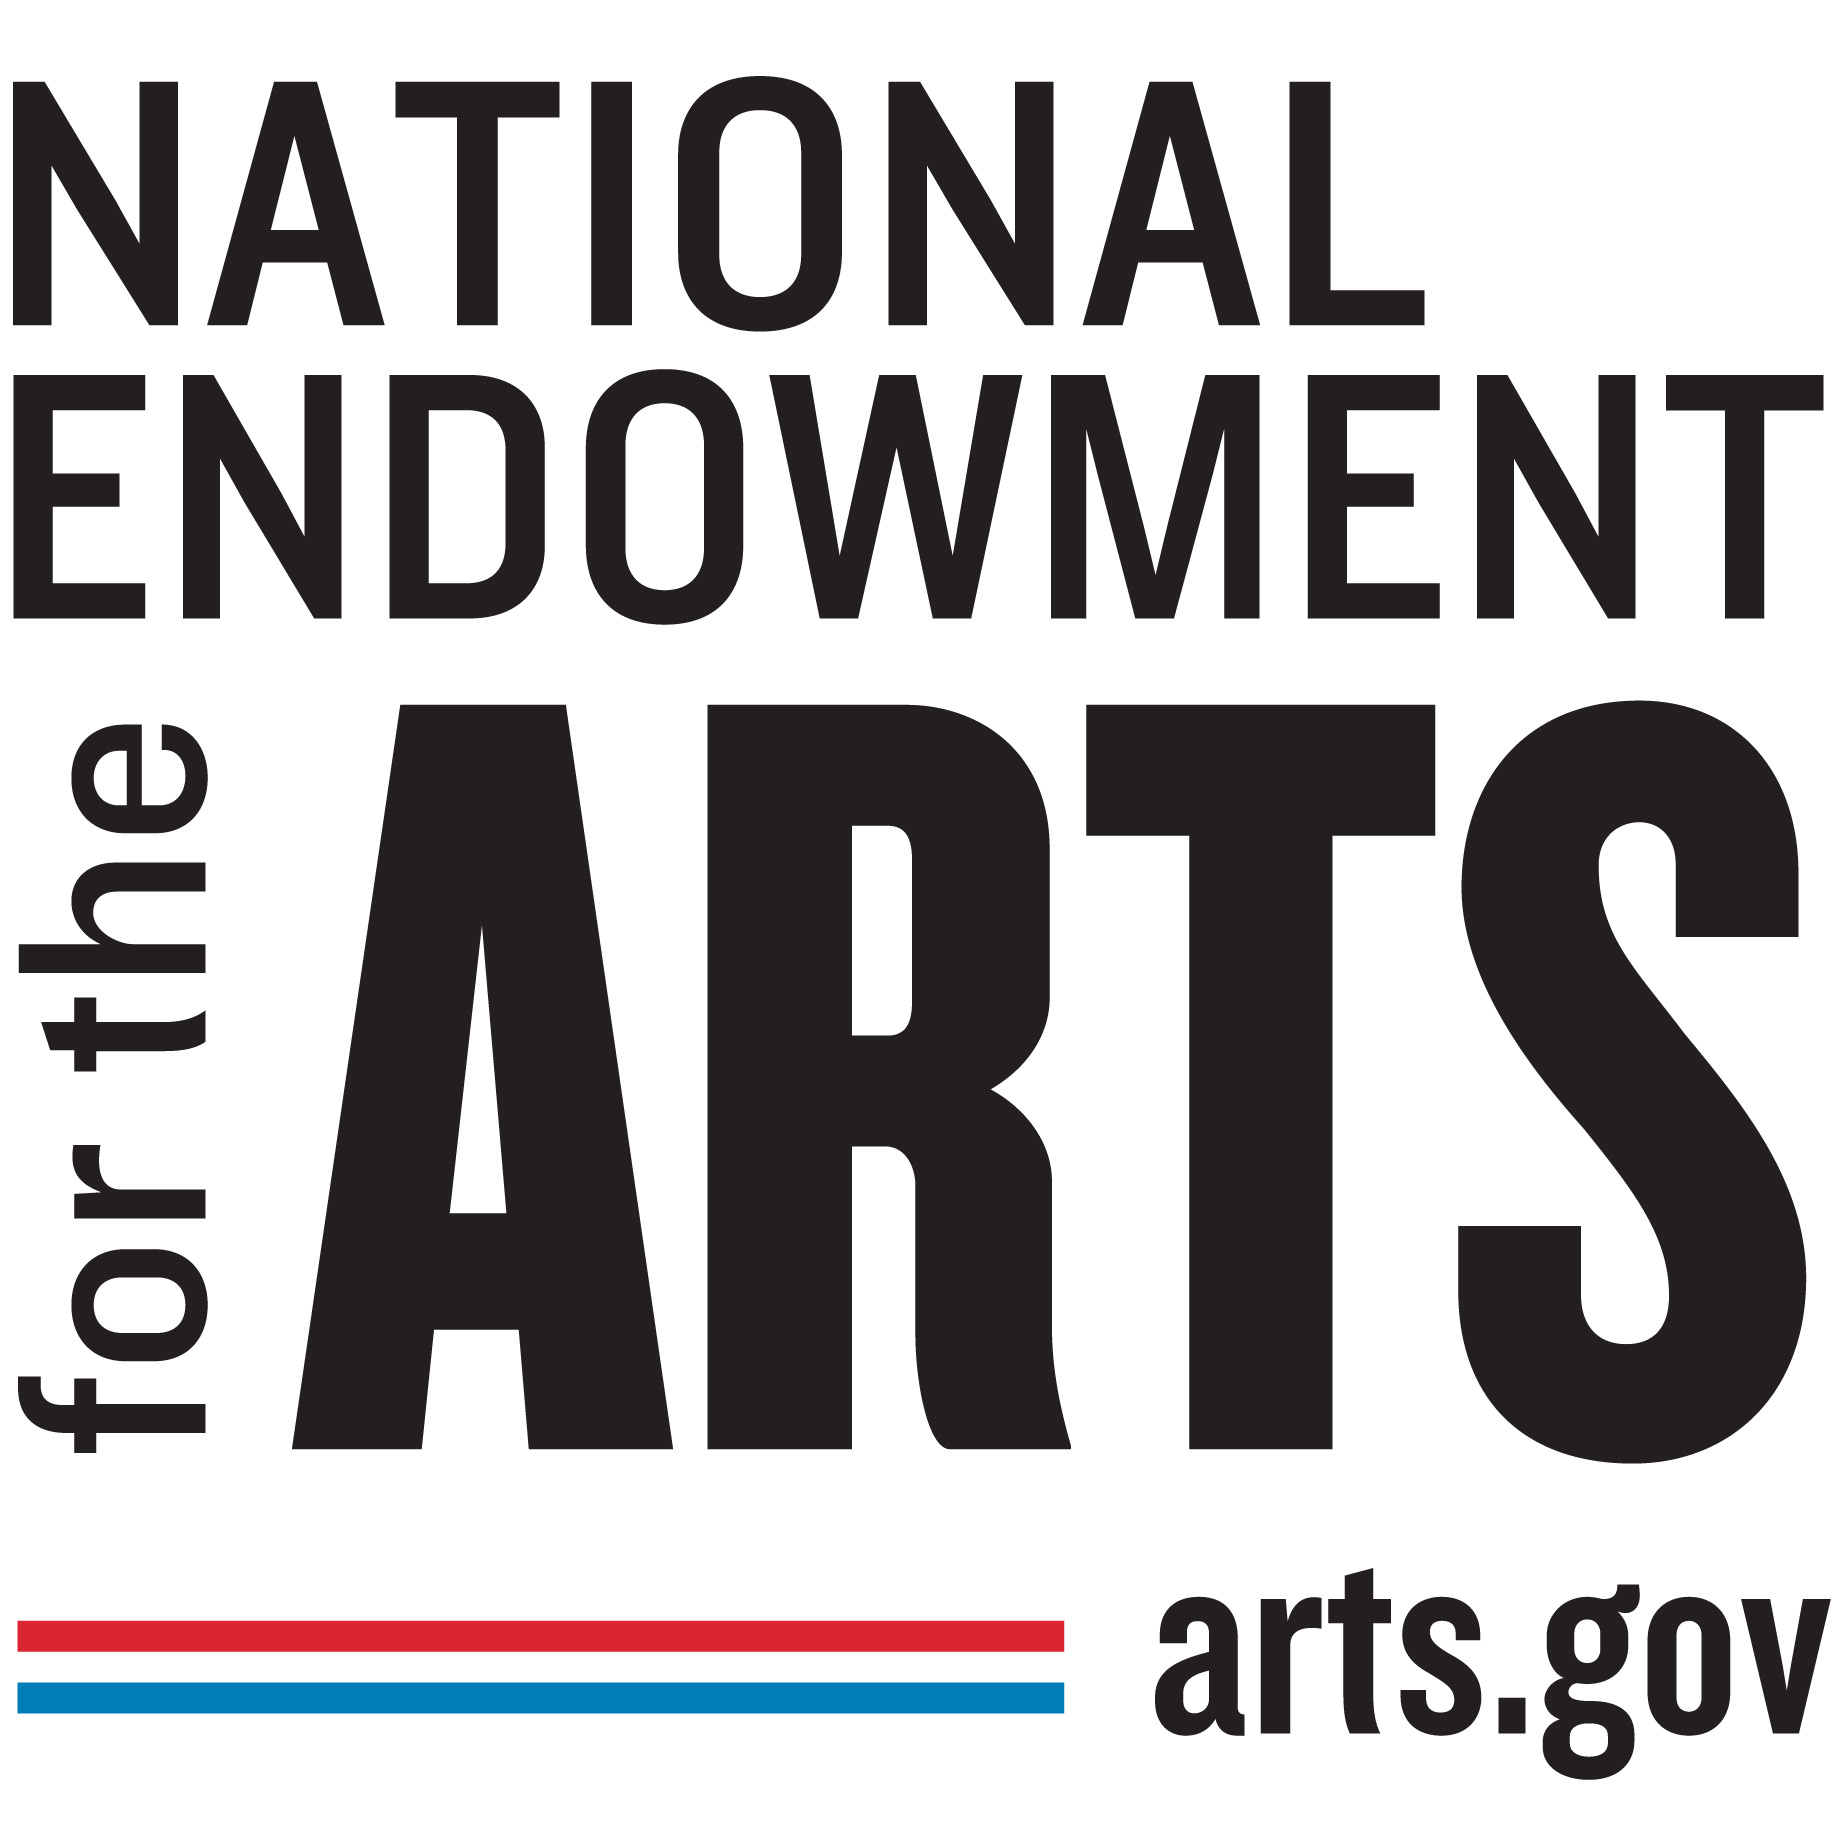 National endowment of the arts